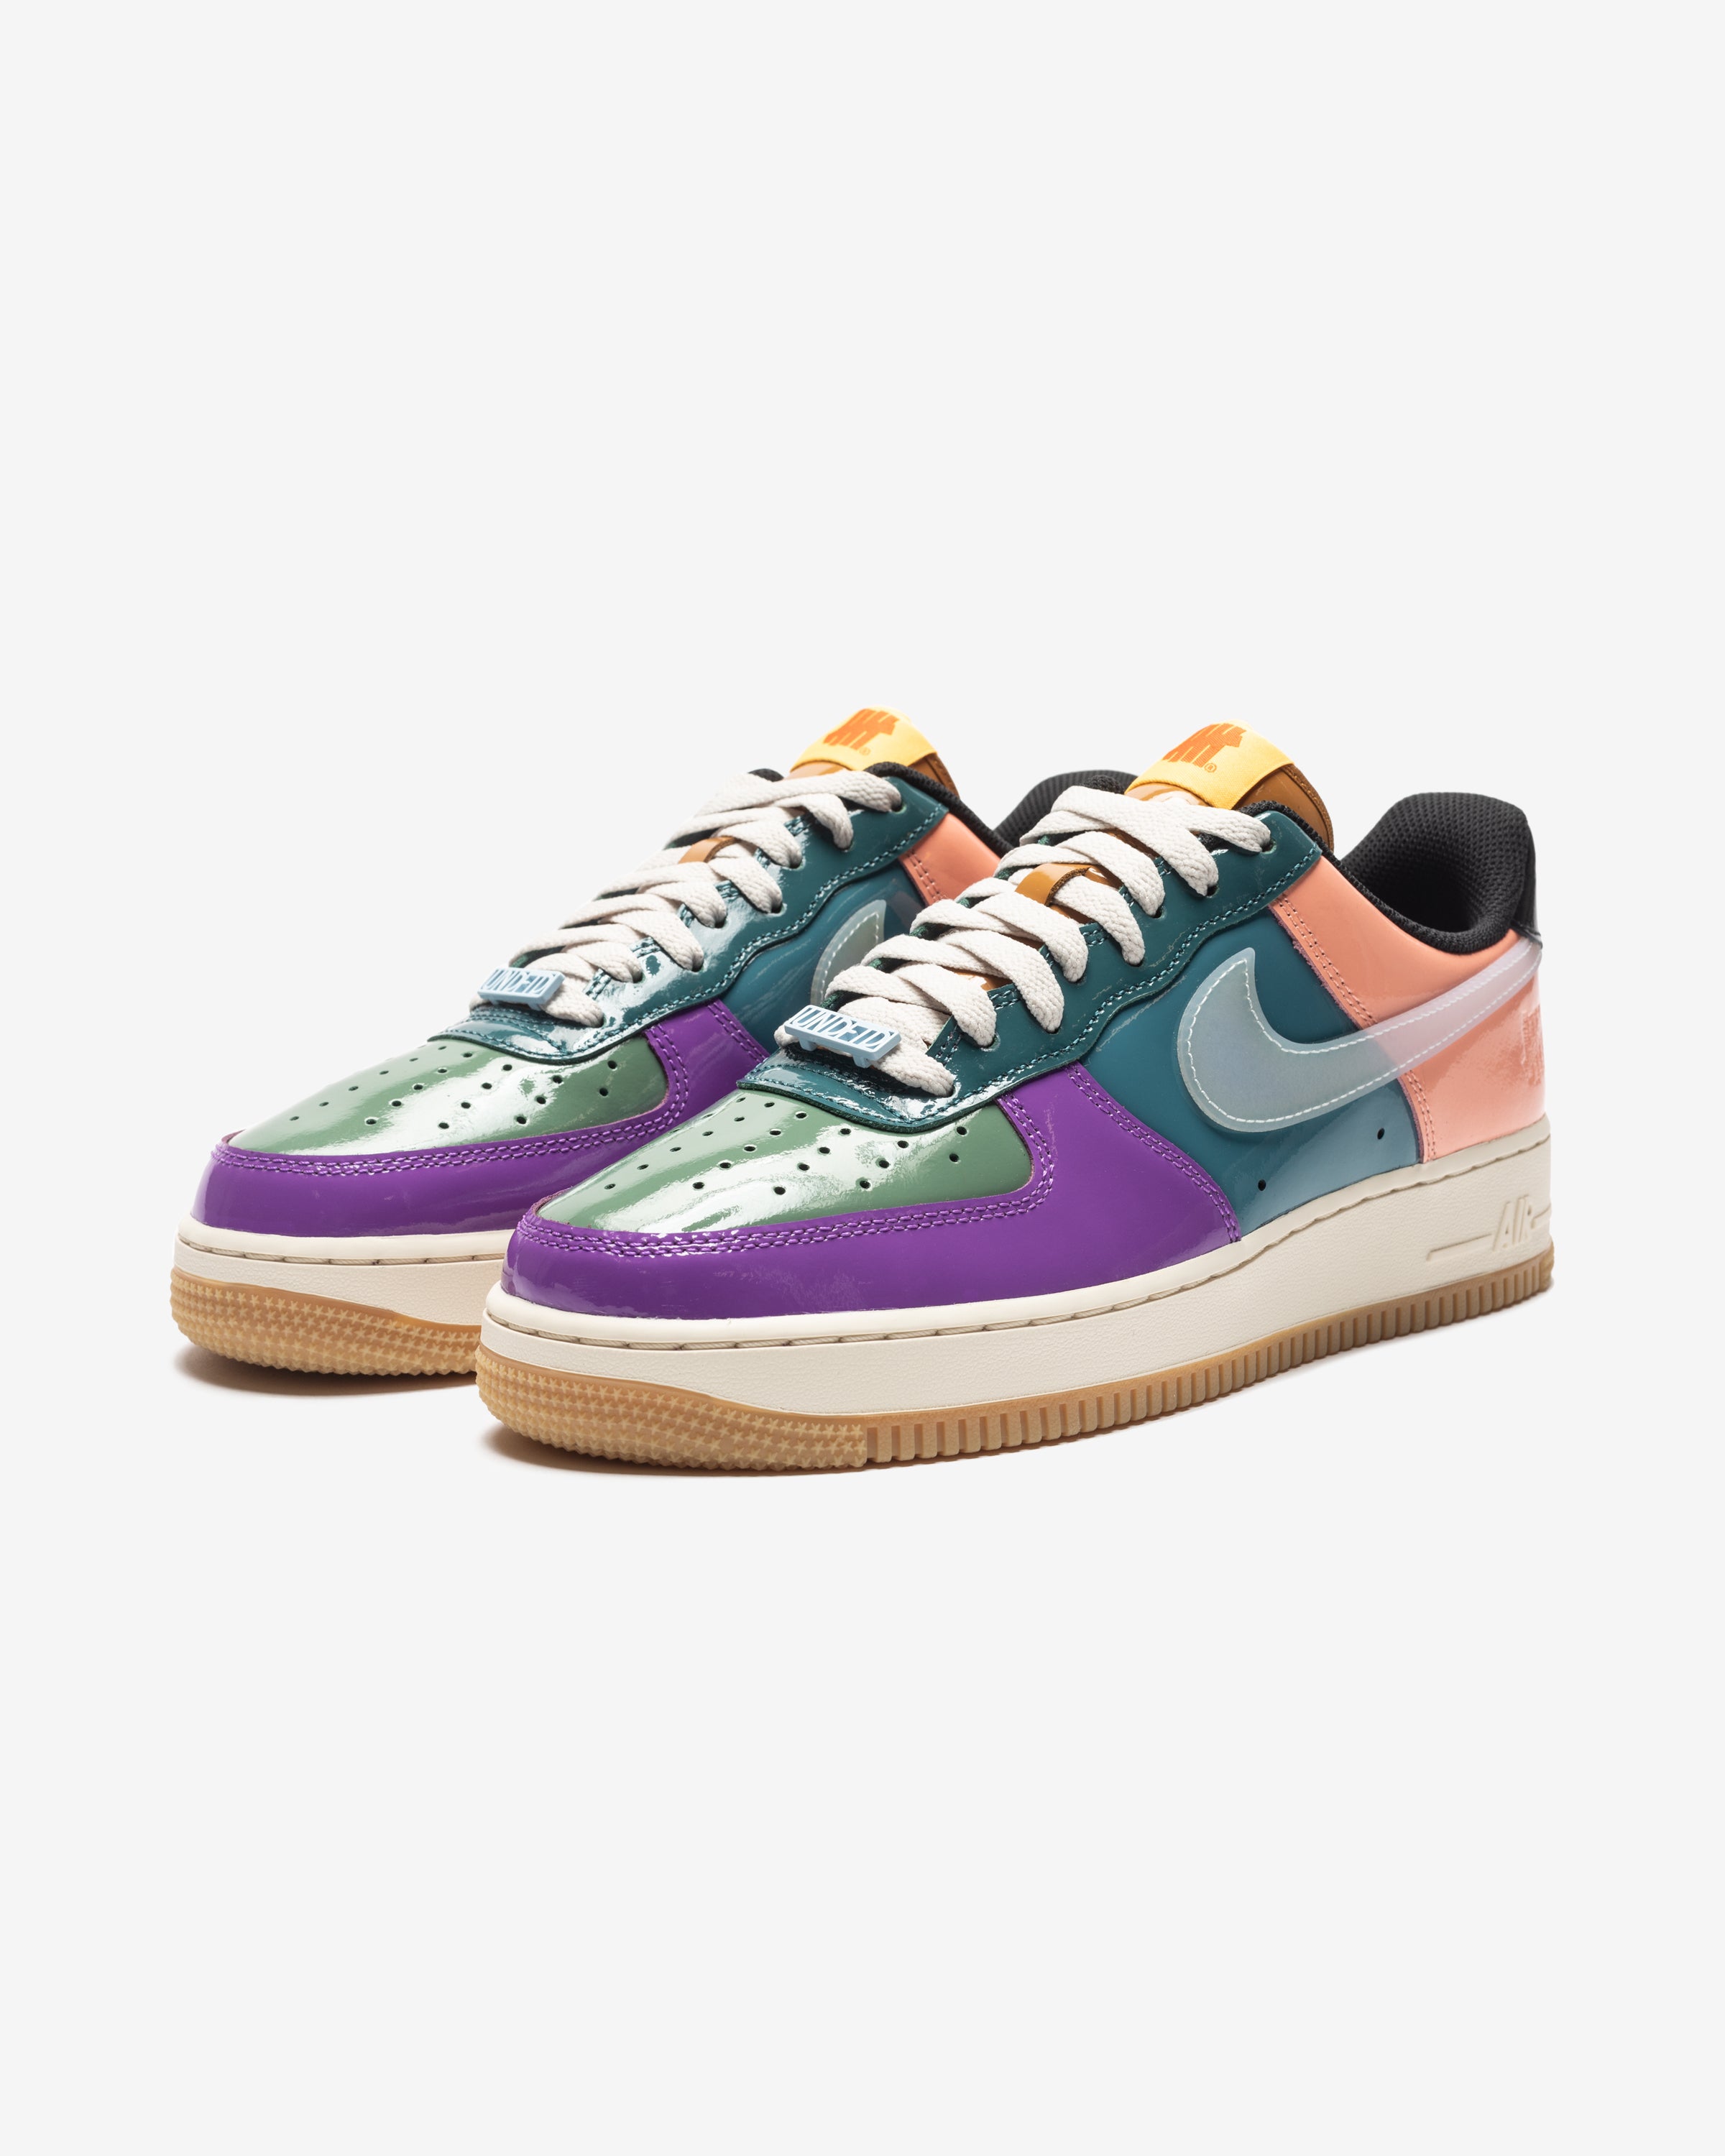 Limited Edition - UNDEFEATED X NIKE AIR FORCE 1 LOW SP “community” - Size 12